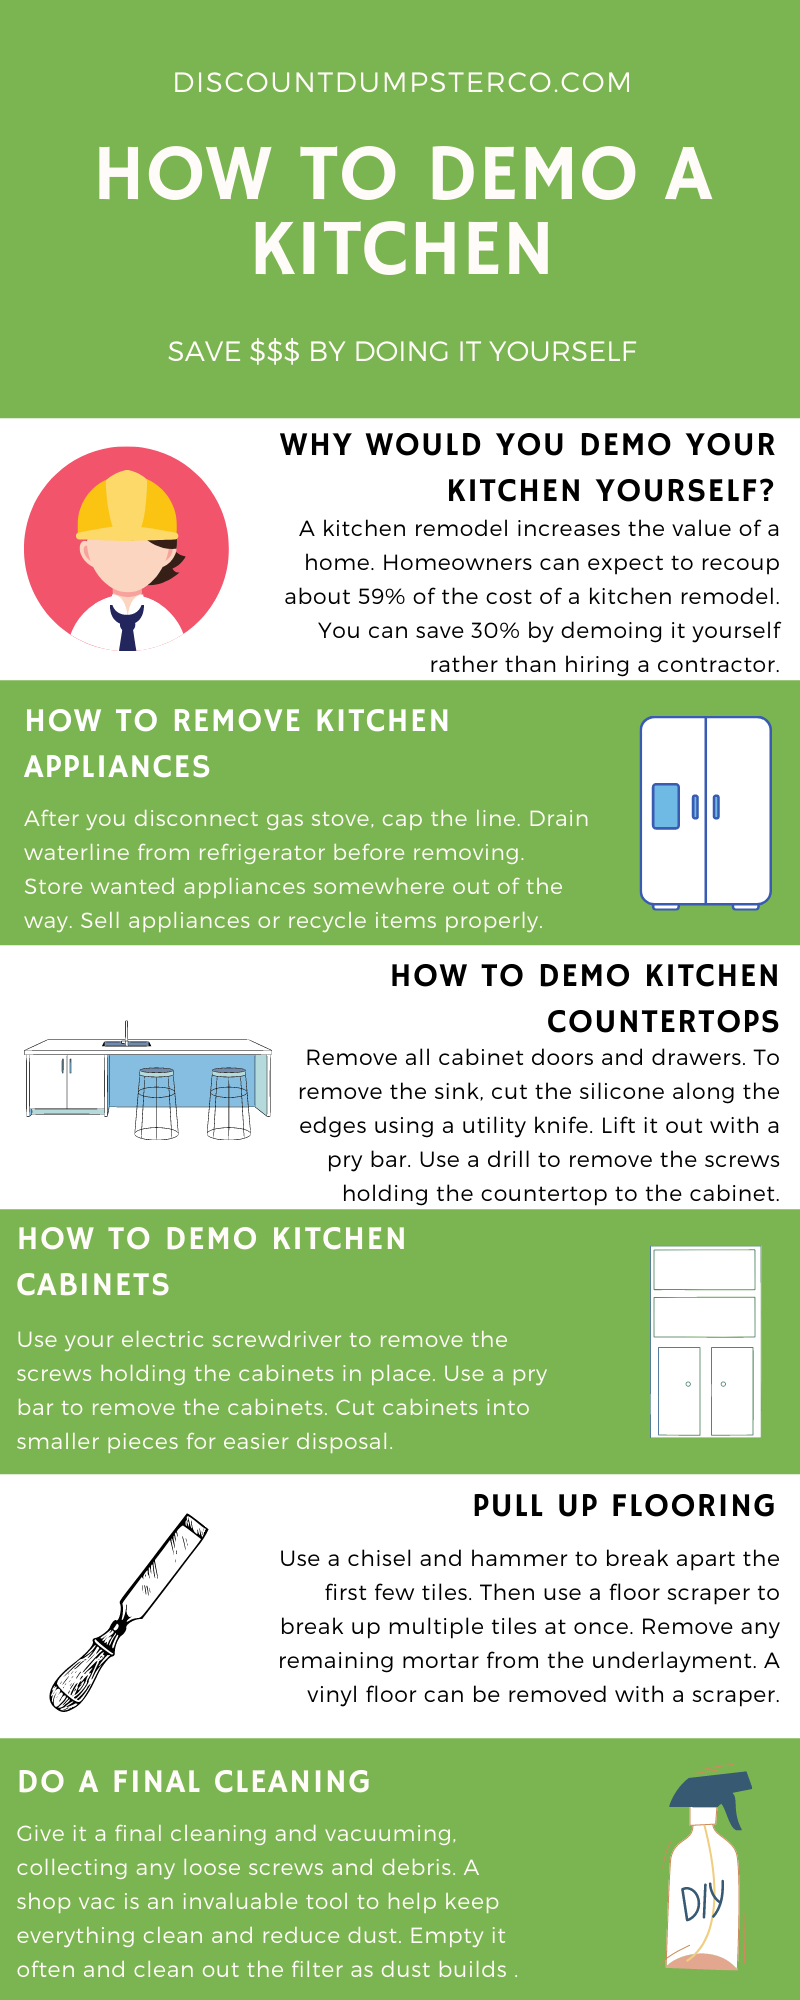 https://discountdumpsterco.com/wp-content/uploads/How-to-Demo-a-Kitchen-Infographic.png